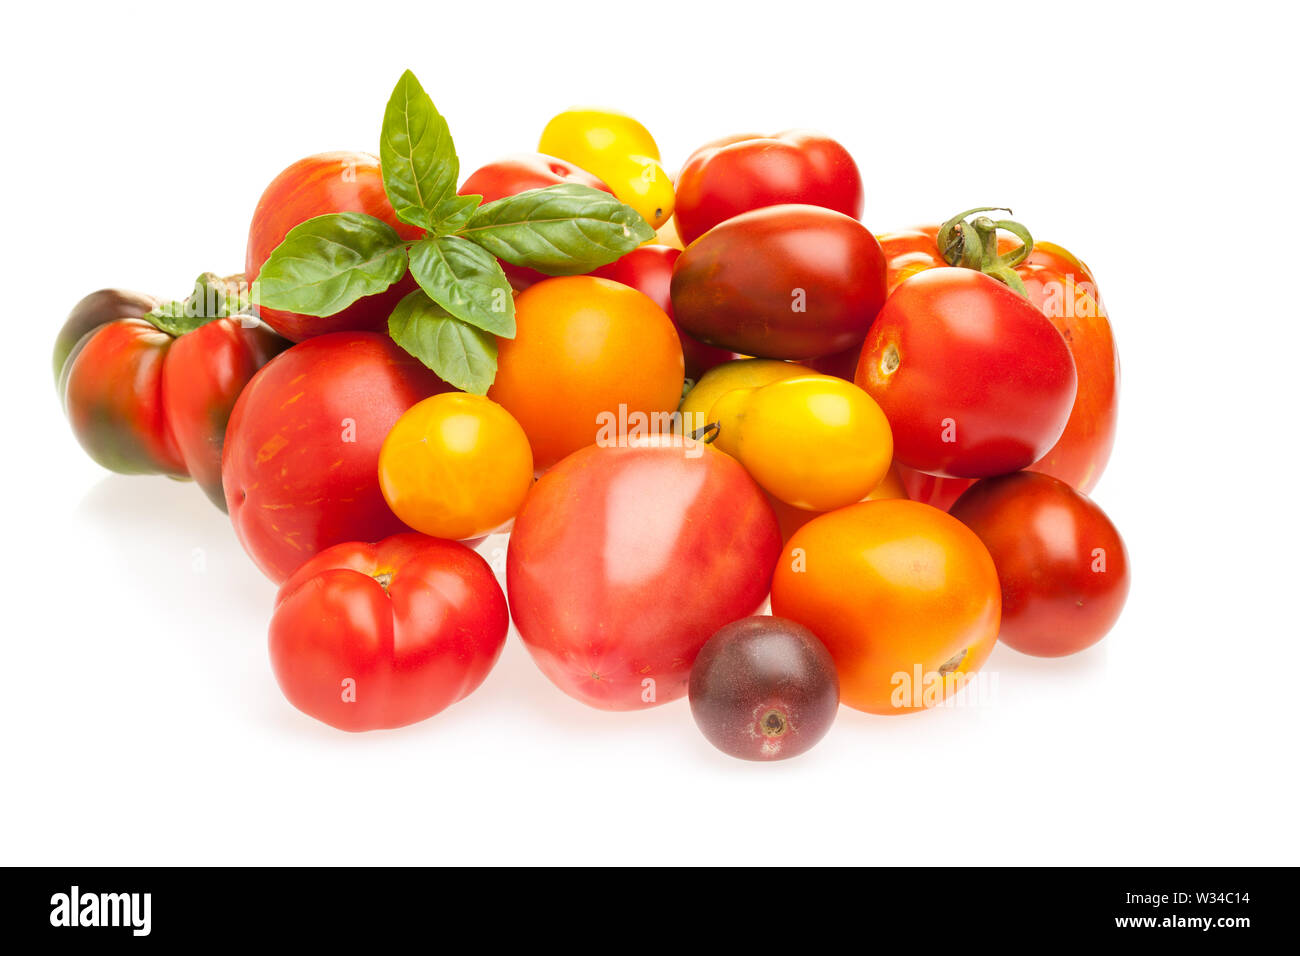 Different kinds of tomato on white background Stock Photo